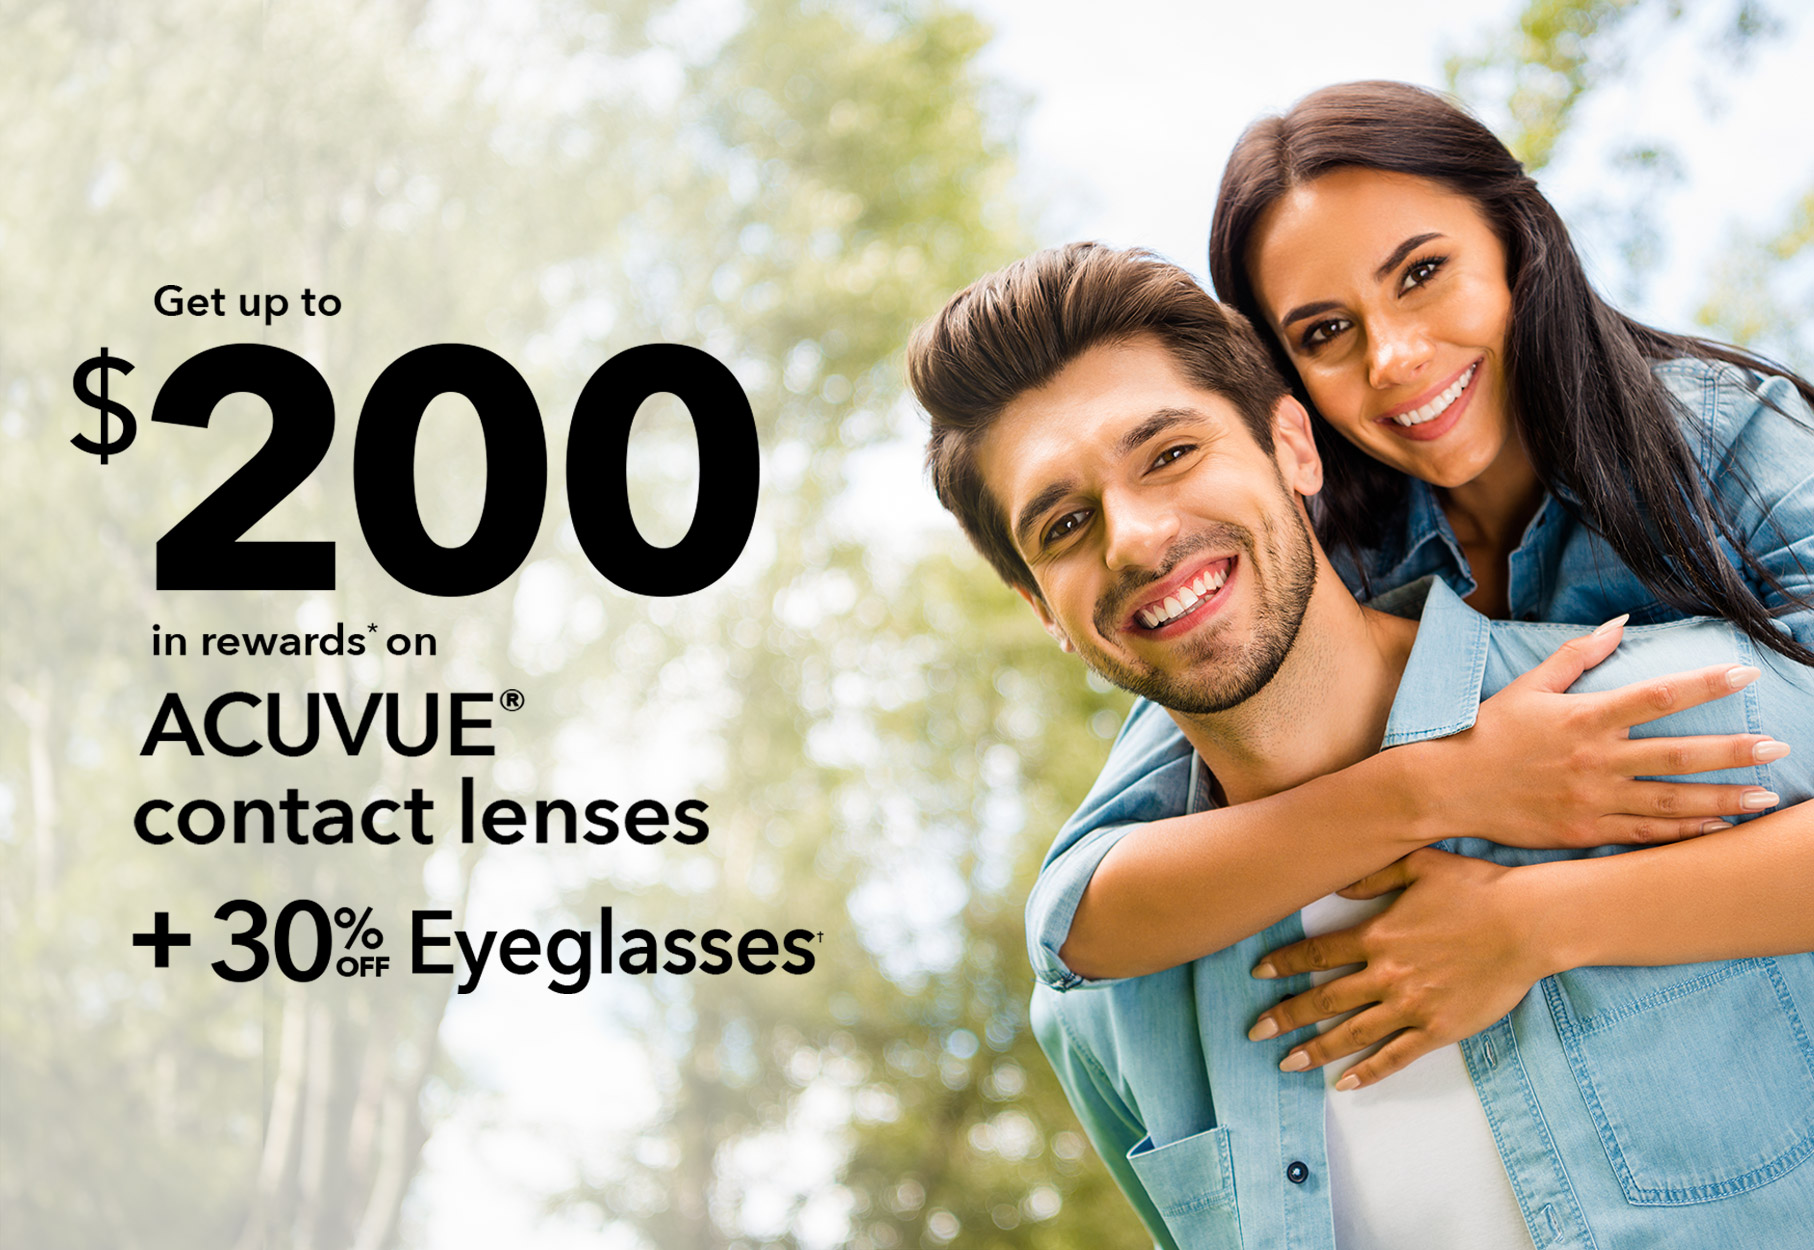 Text: GET UP TO $200 IN REWARDS ON ACUVUE CONTACT LENSES* + 30% OFF EYEGLASSES† Photo: Couple with trees in the background